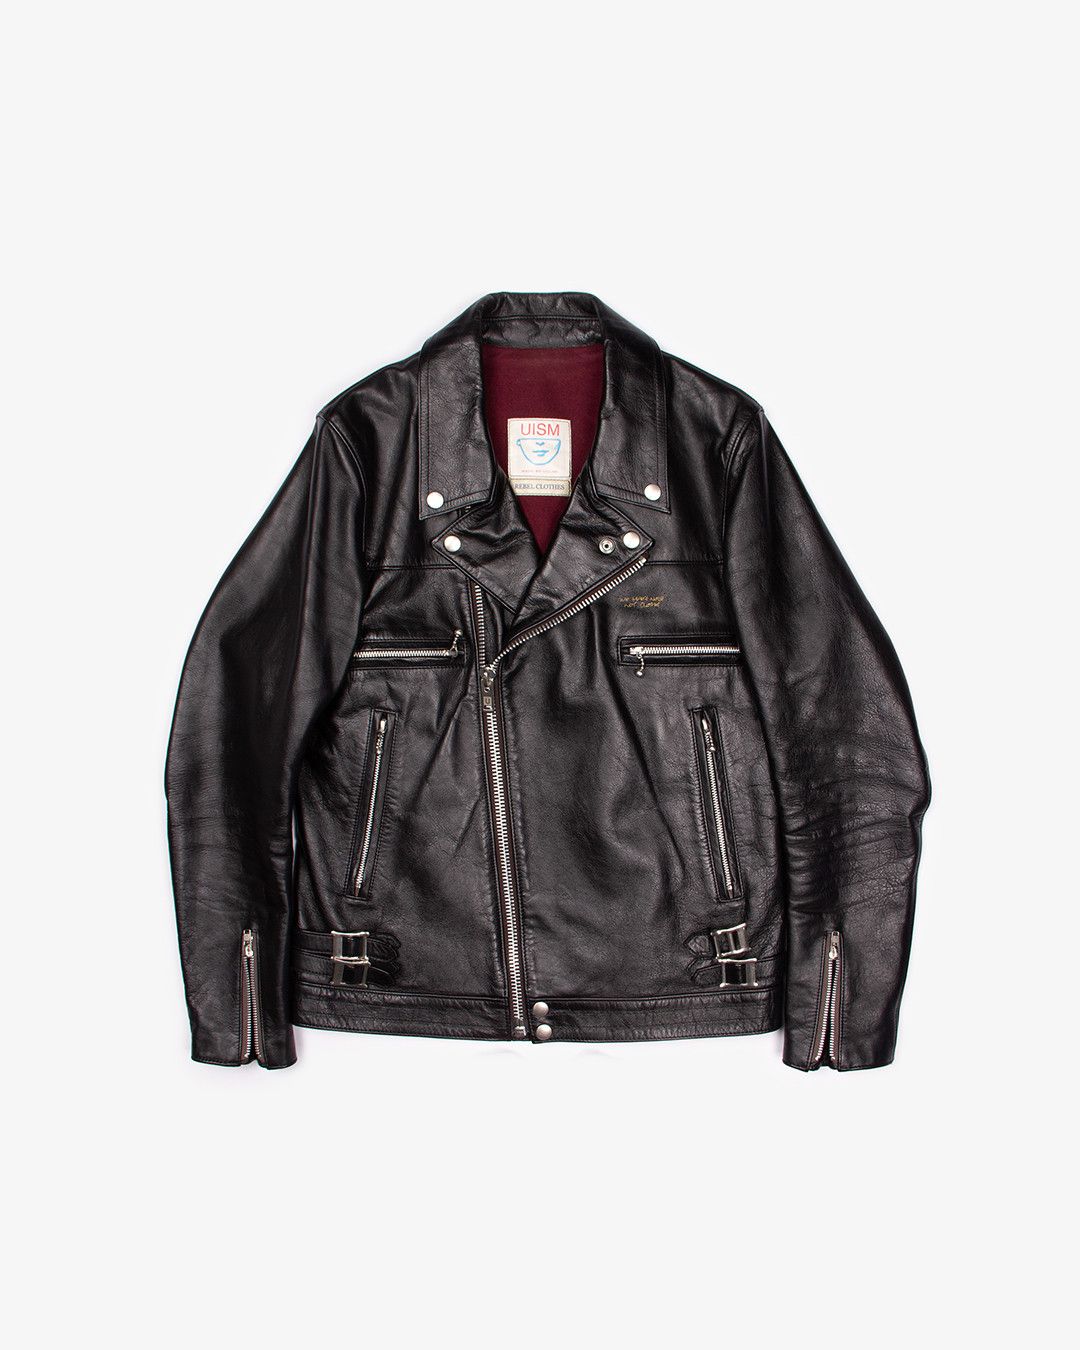 Undercover UNDERCOVER DOUBLE RIDER LEATHER JACKET | 2 | Grailed